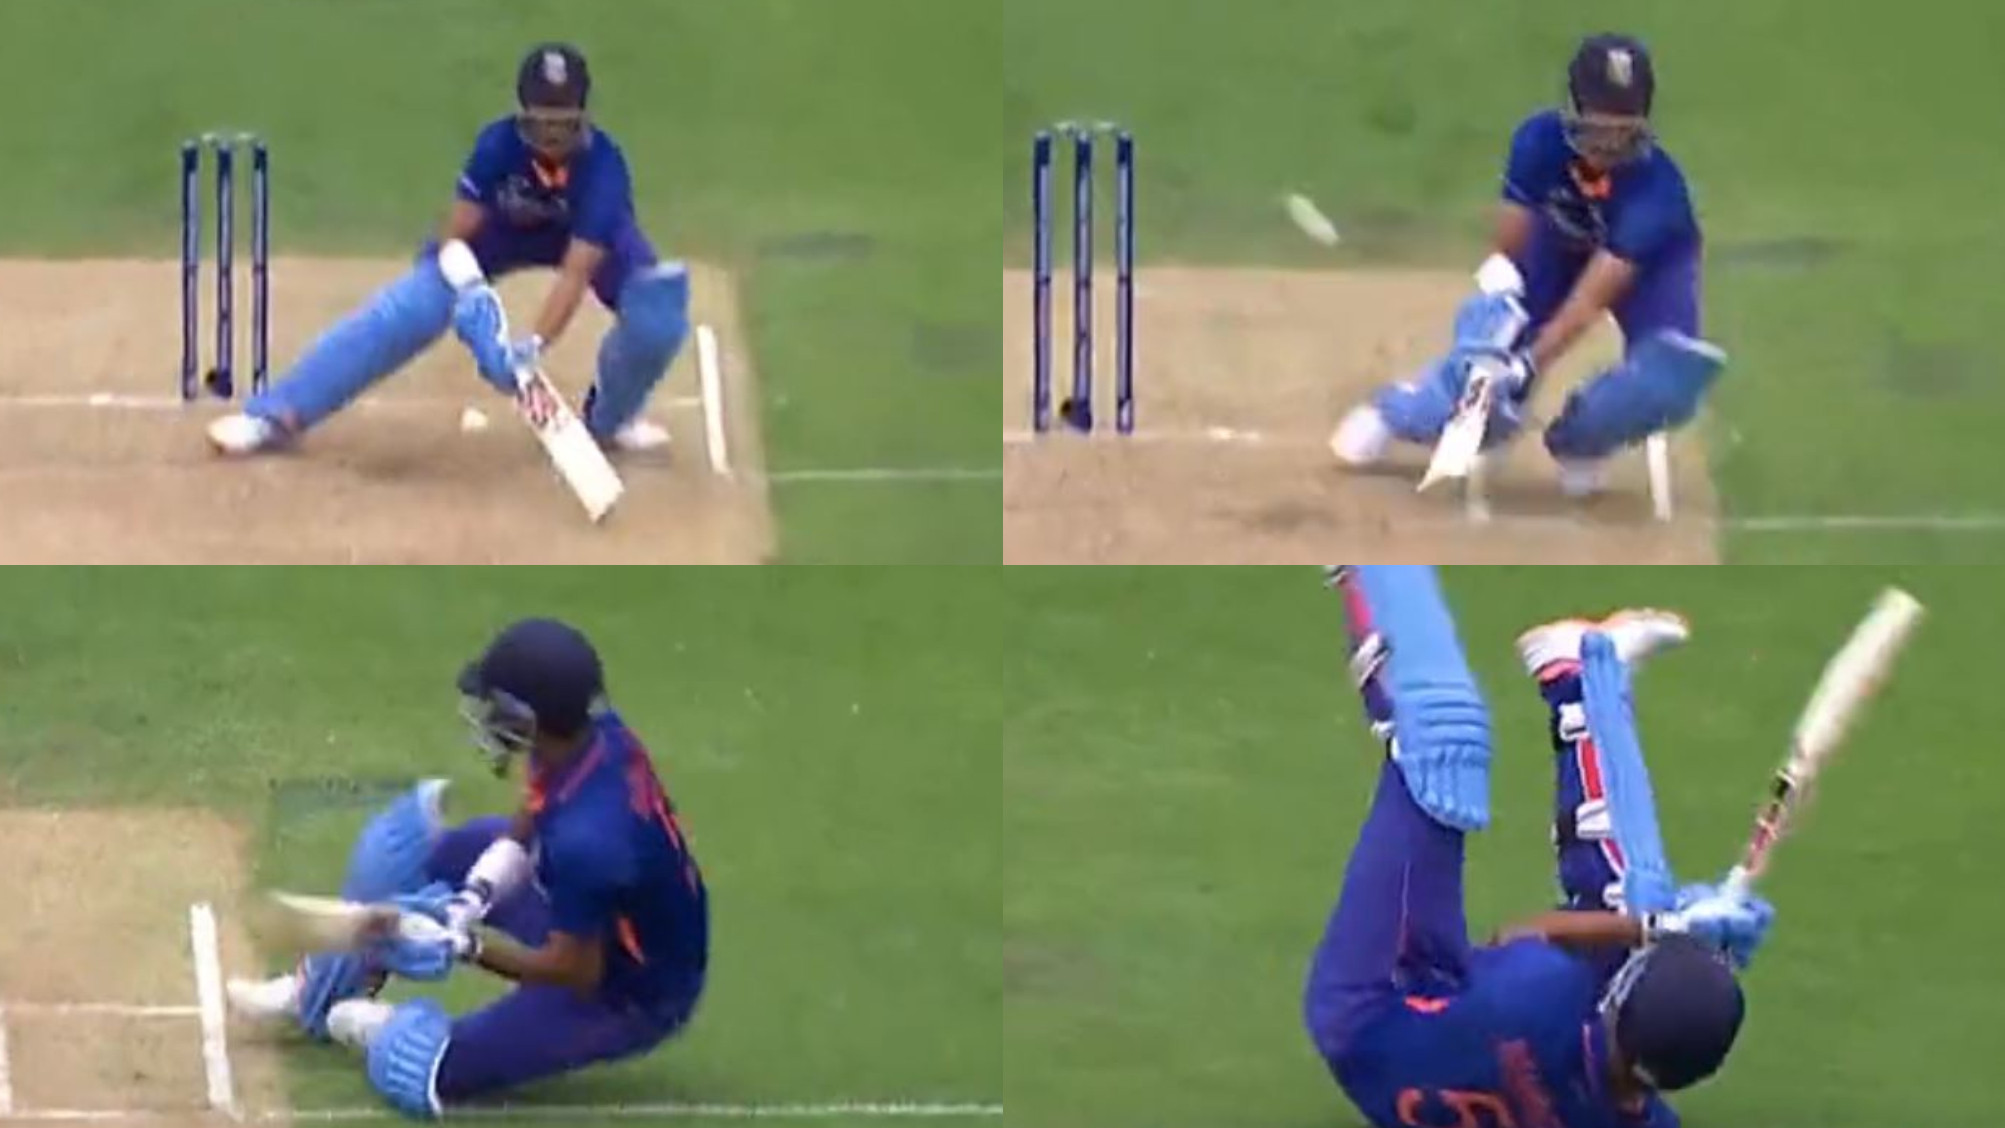 NZ v IND 2022: WATCH- Washington Sundar moves way outside off-stump; falls while playing an amazing shot in 1st ODI